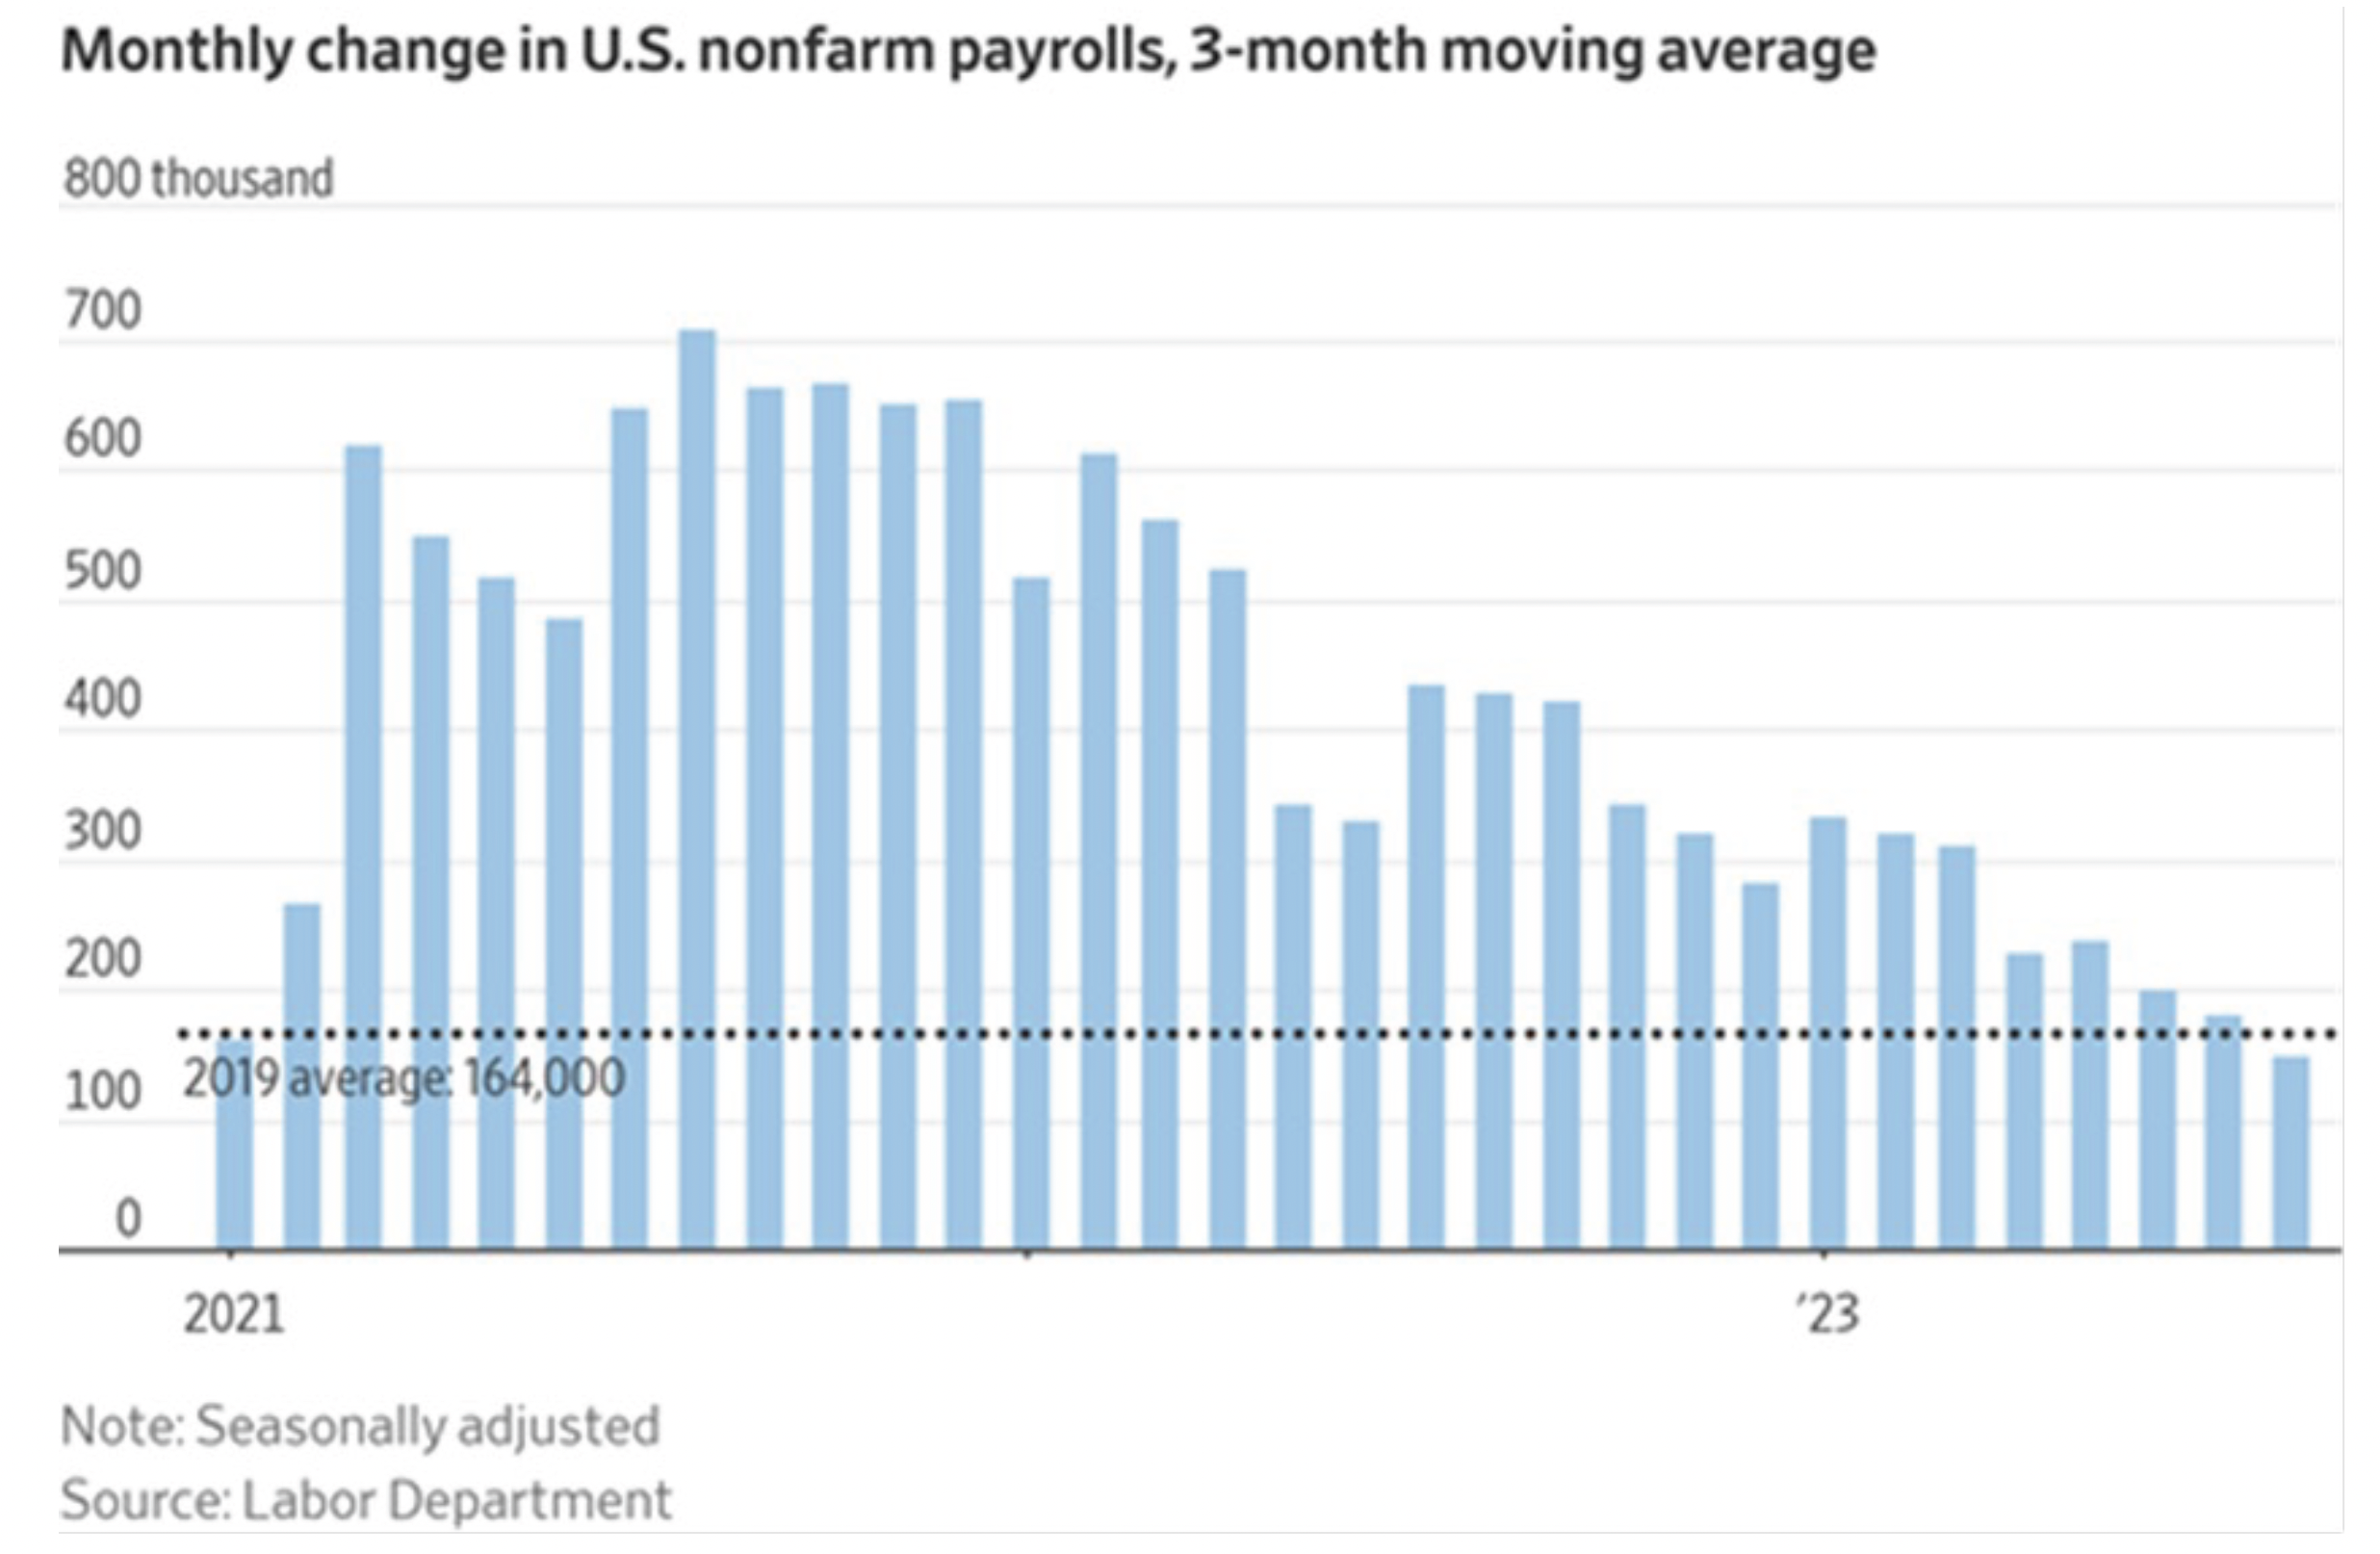 monthly change in U.S. nonfarm payrolls, 3-month moving average